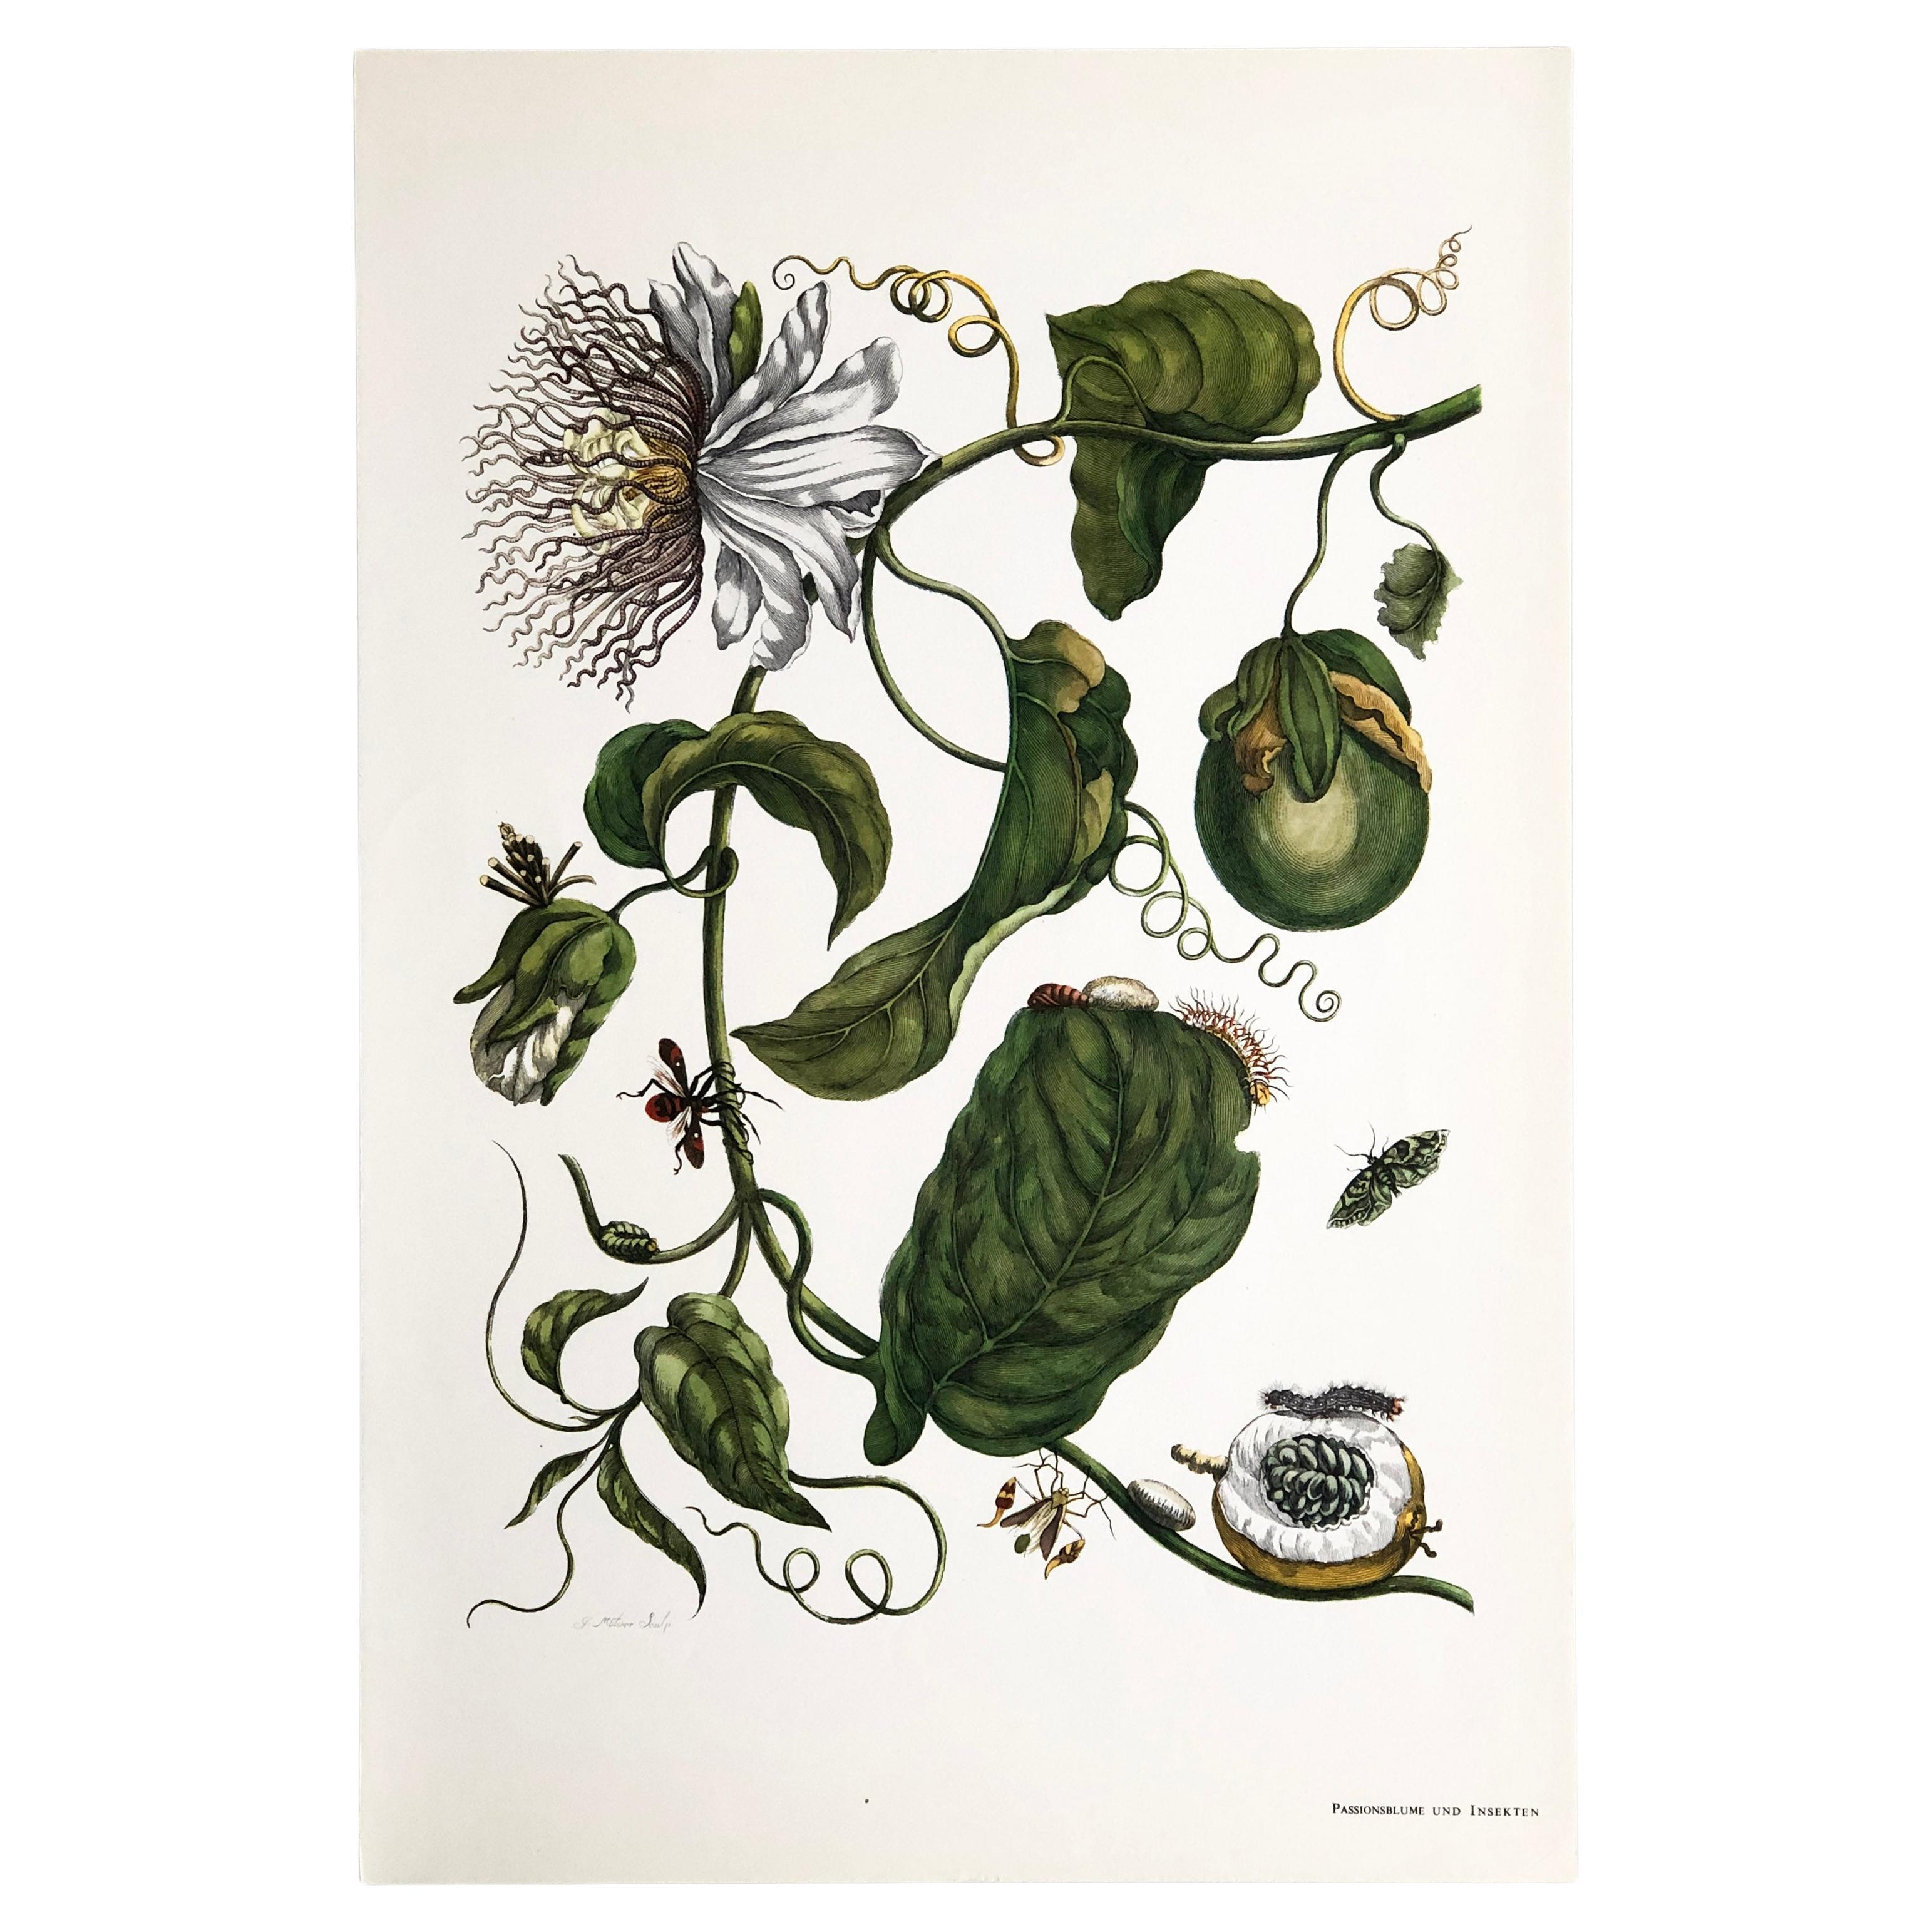 Maria Sibylla Merian - J. Mulder - Passionflower and insects Nr. 21 For Sale